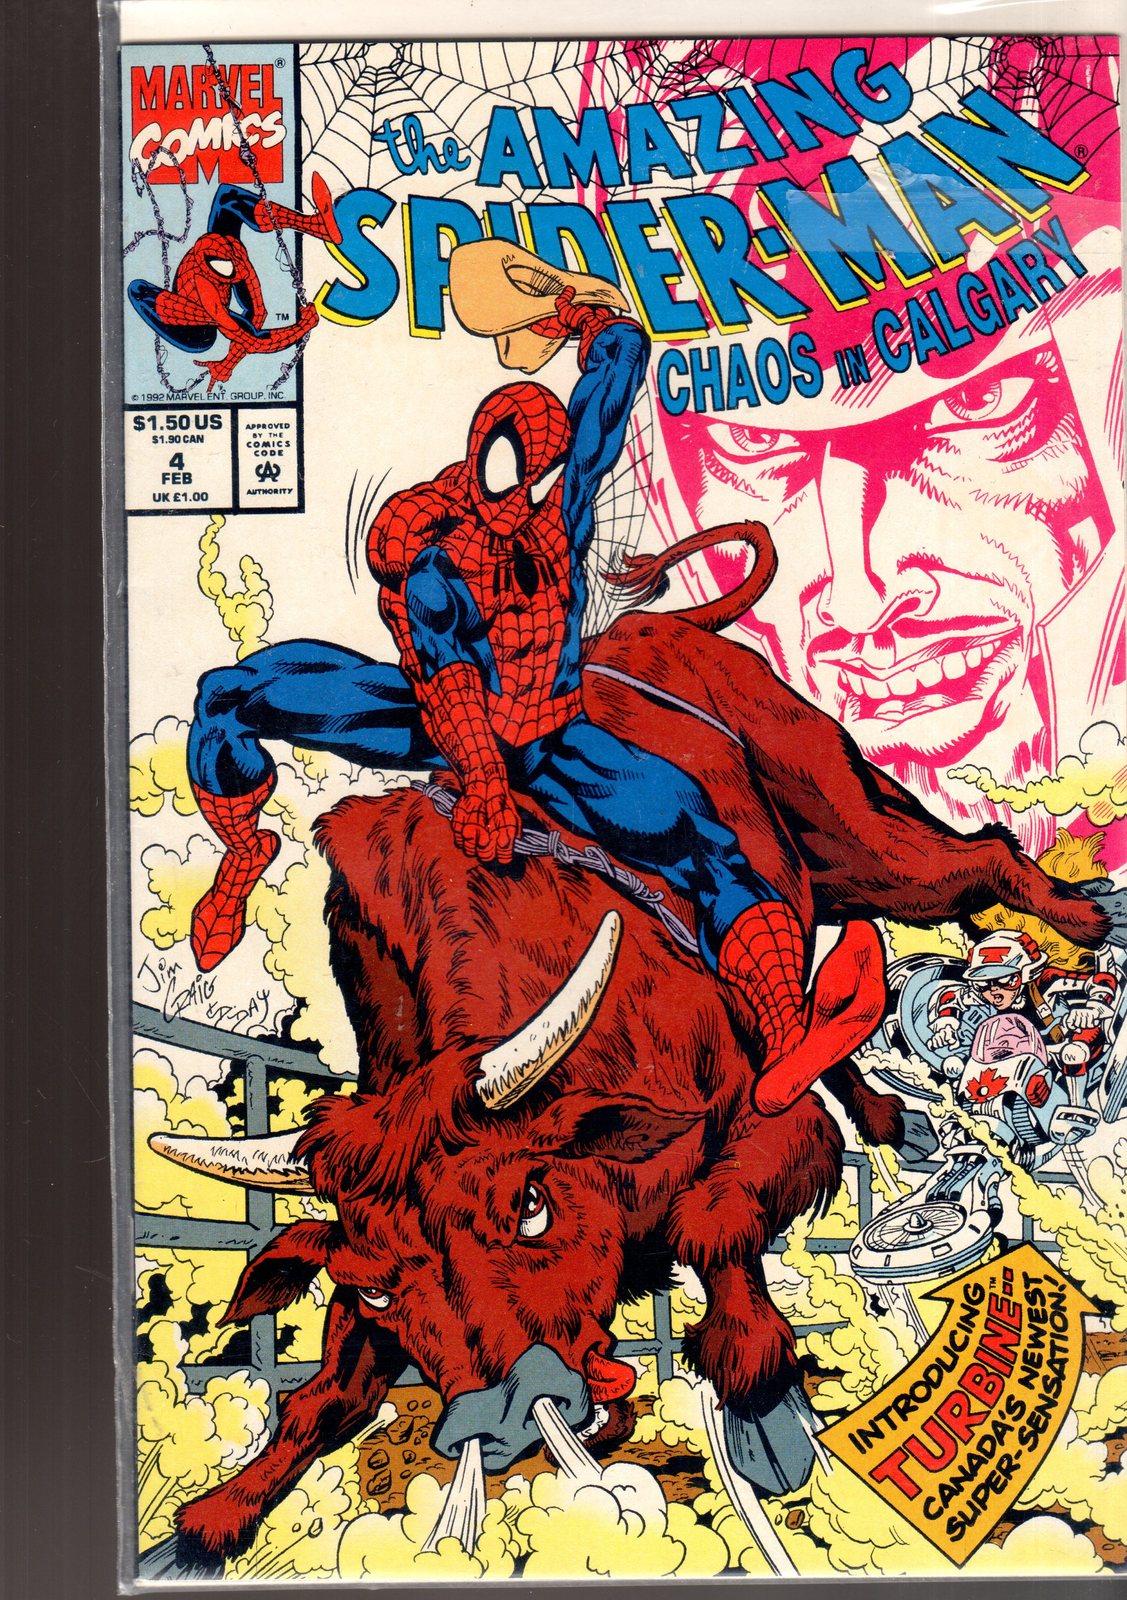 Primary image for The Amazing Spider-Man, Chaos In Calgary #4, Marvel Comic 1993